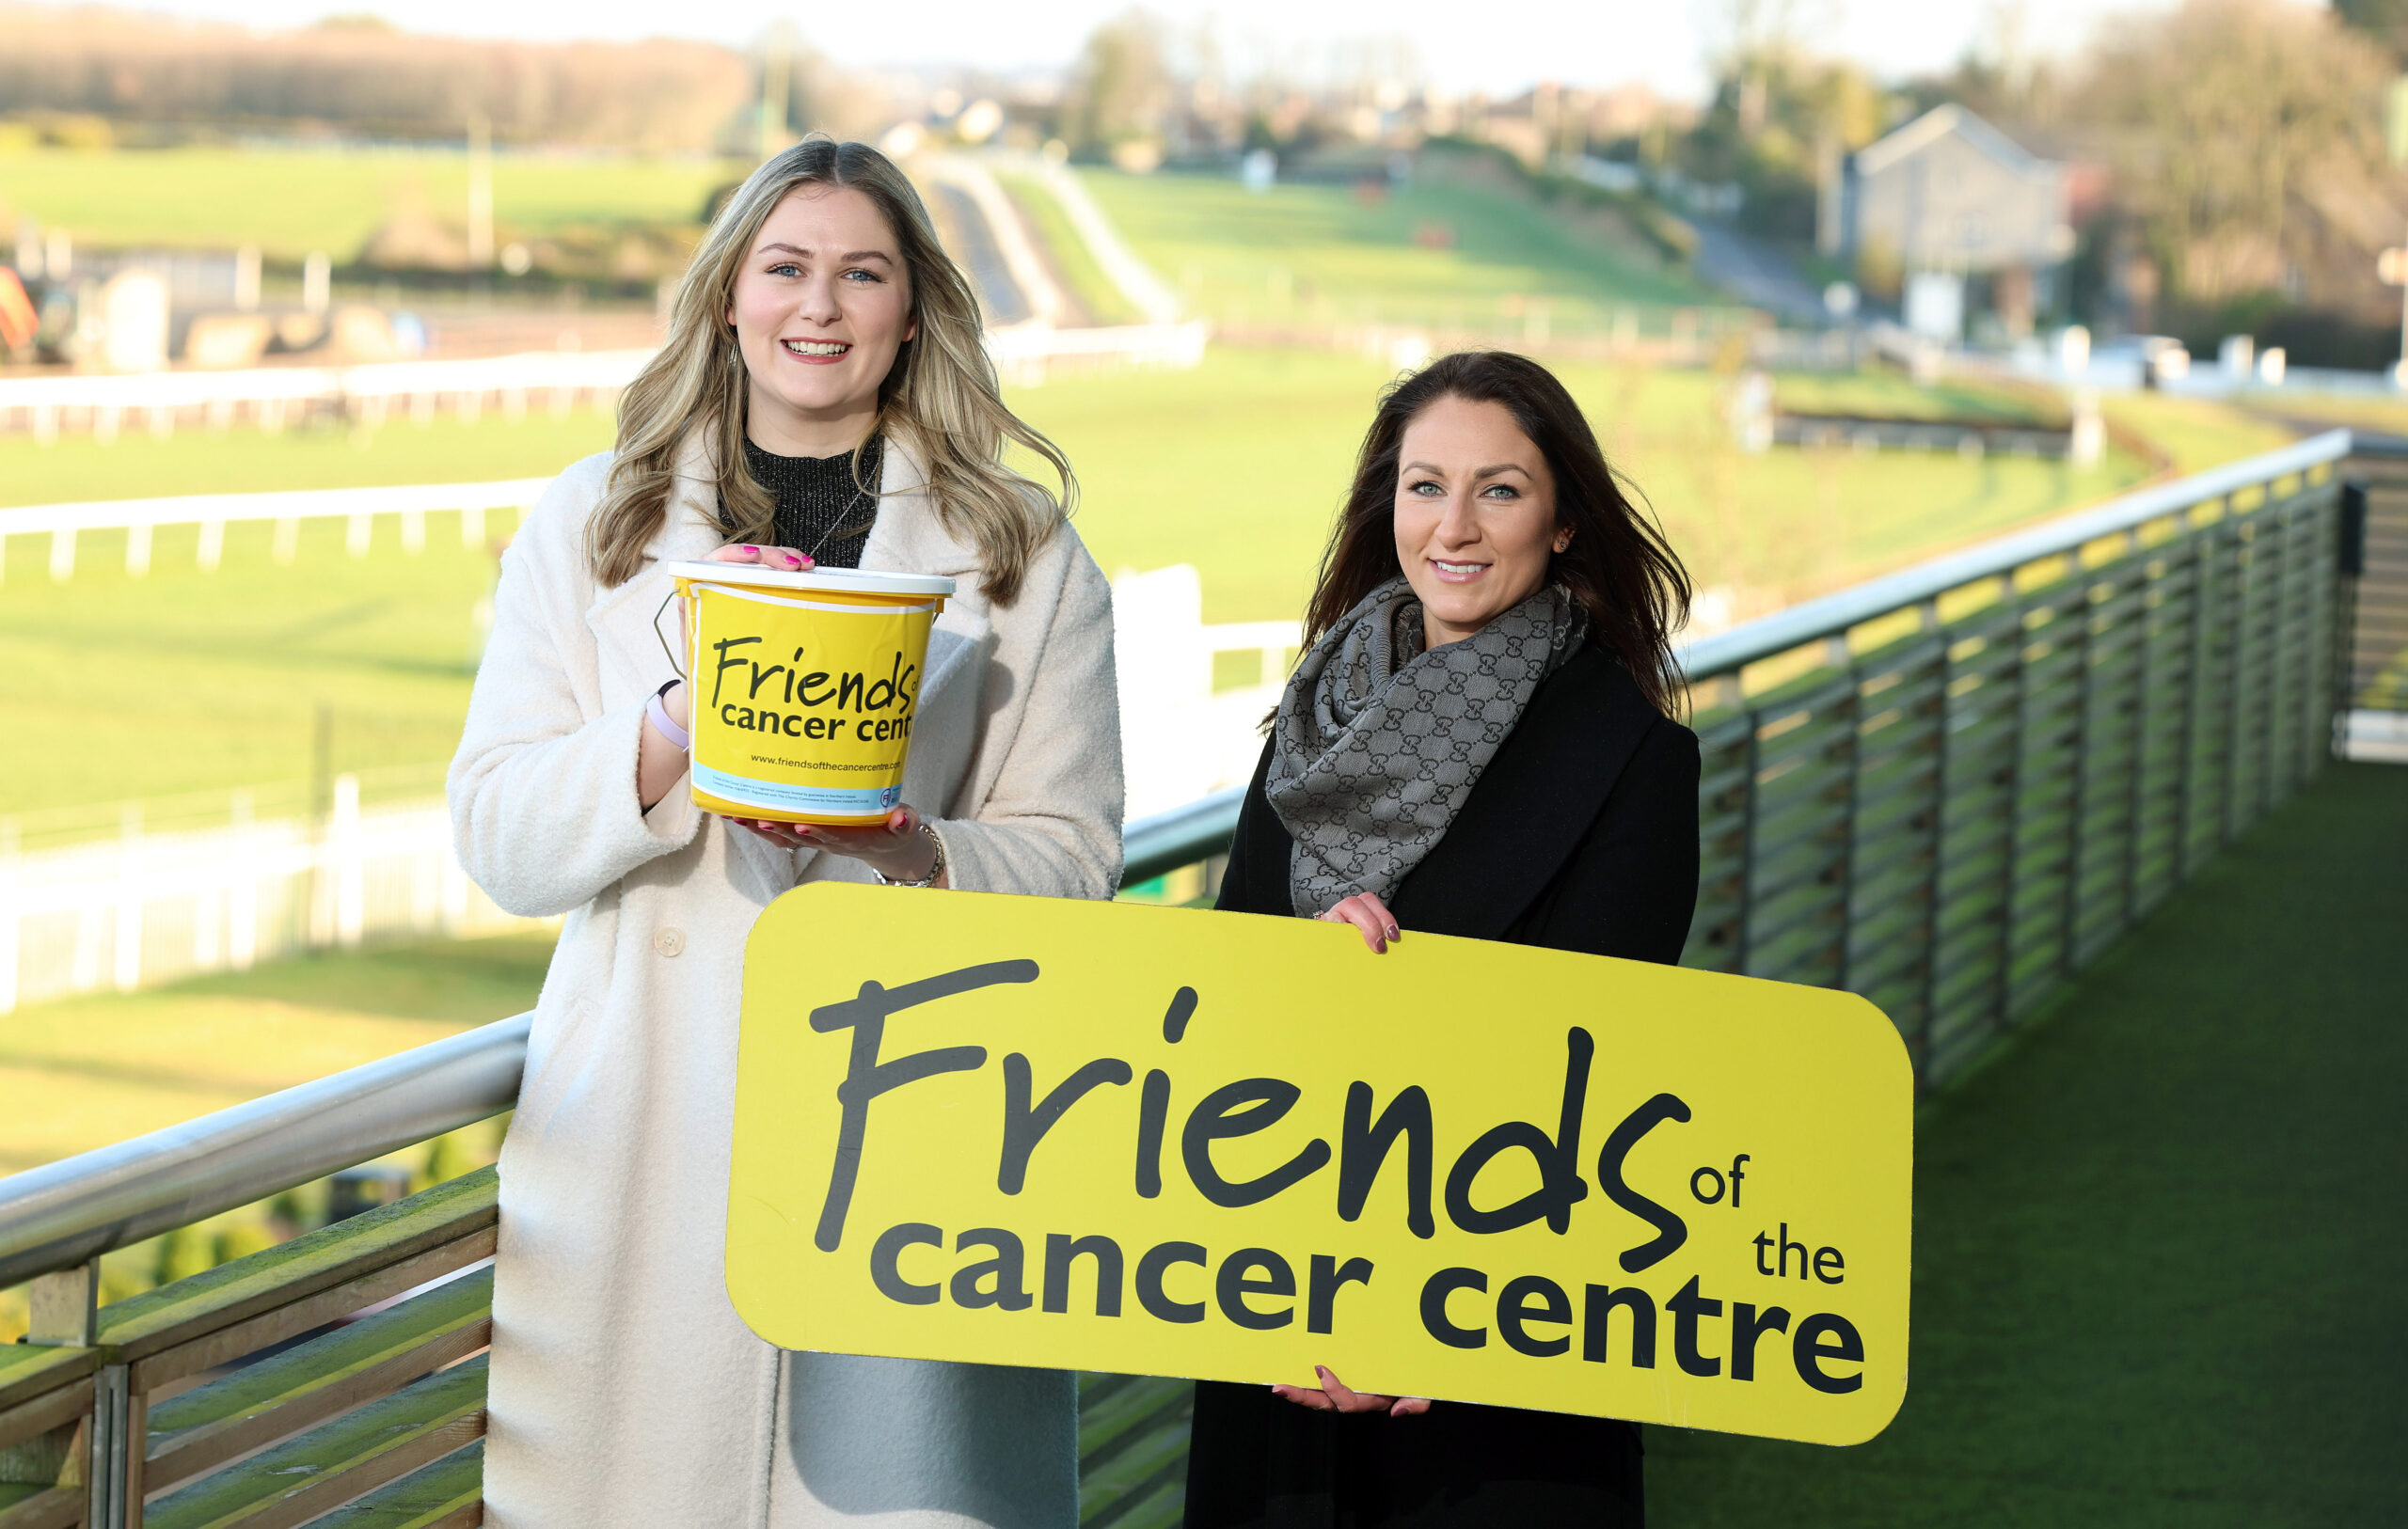 Down Royal and Friends of the Cancer Centre announce winning charity partnership